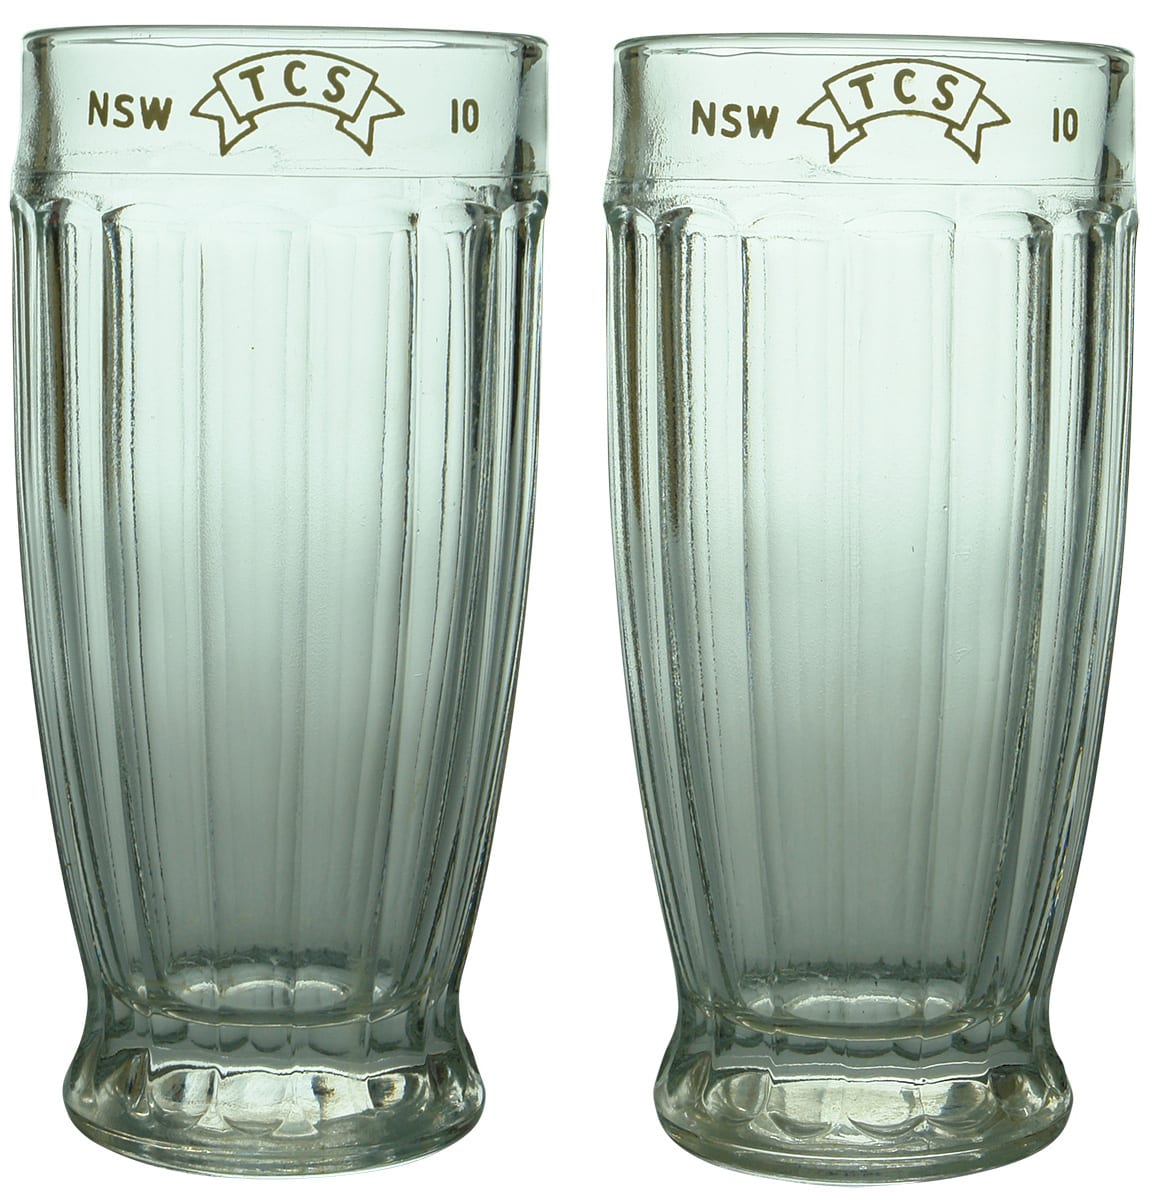 NSW TCS Ten ounce Fluted Glasses